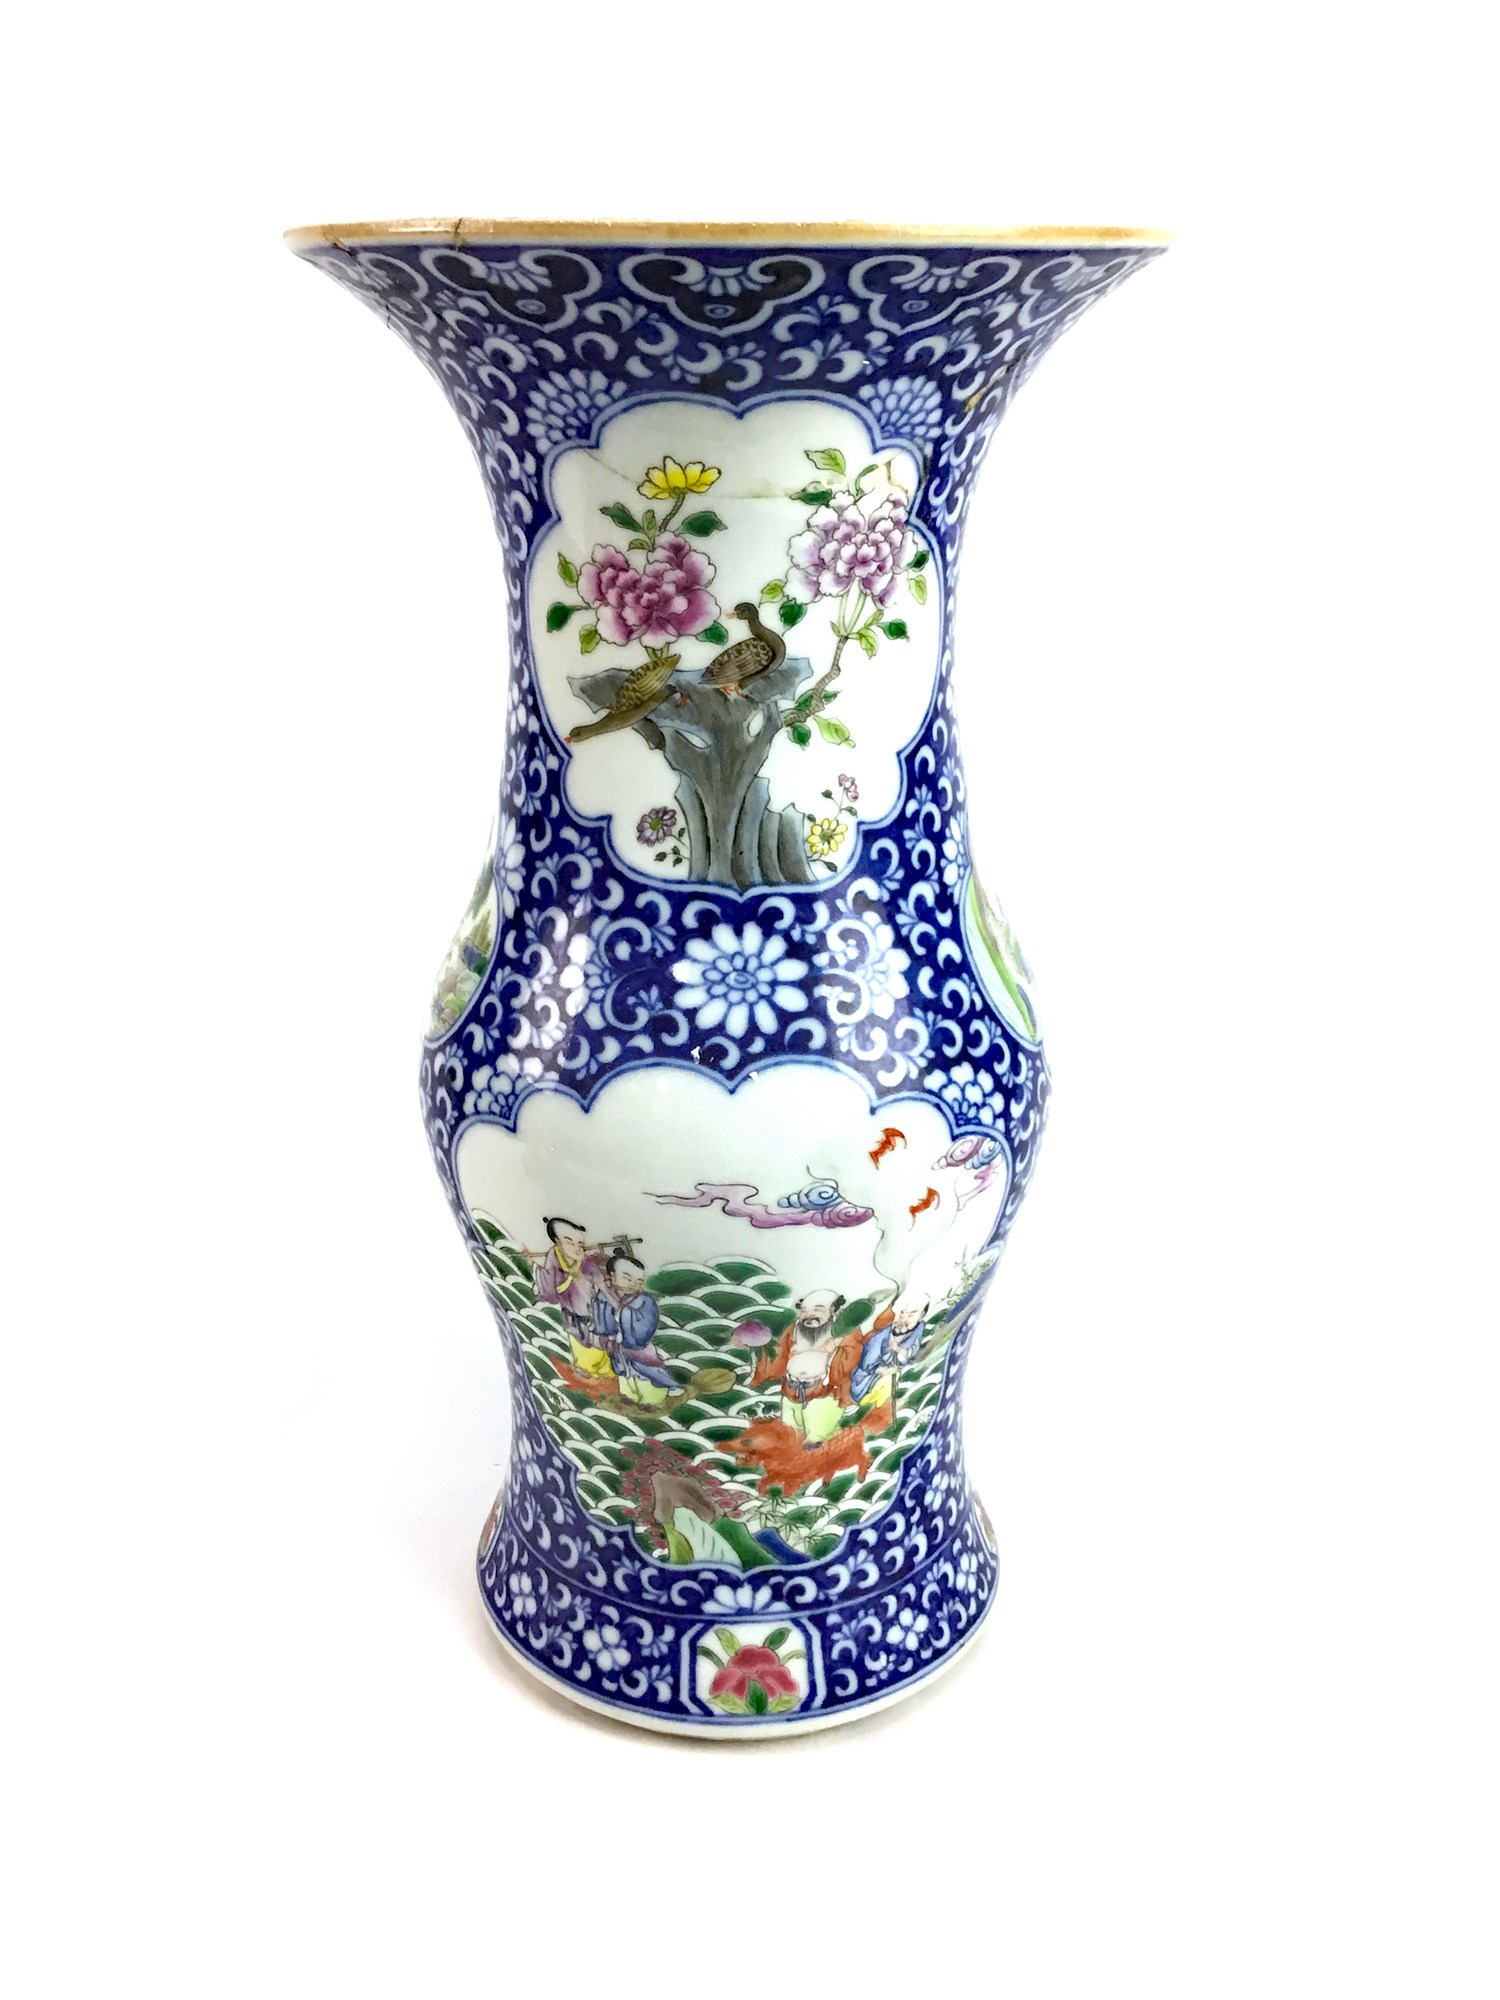 A CHINESE QING DYNASTY VASE